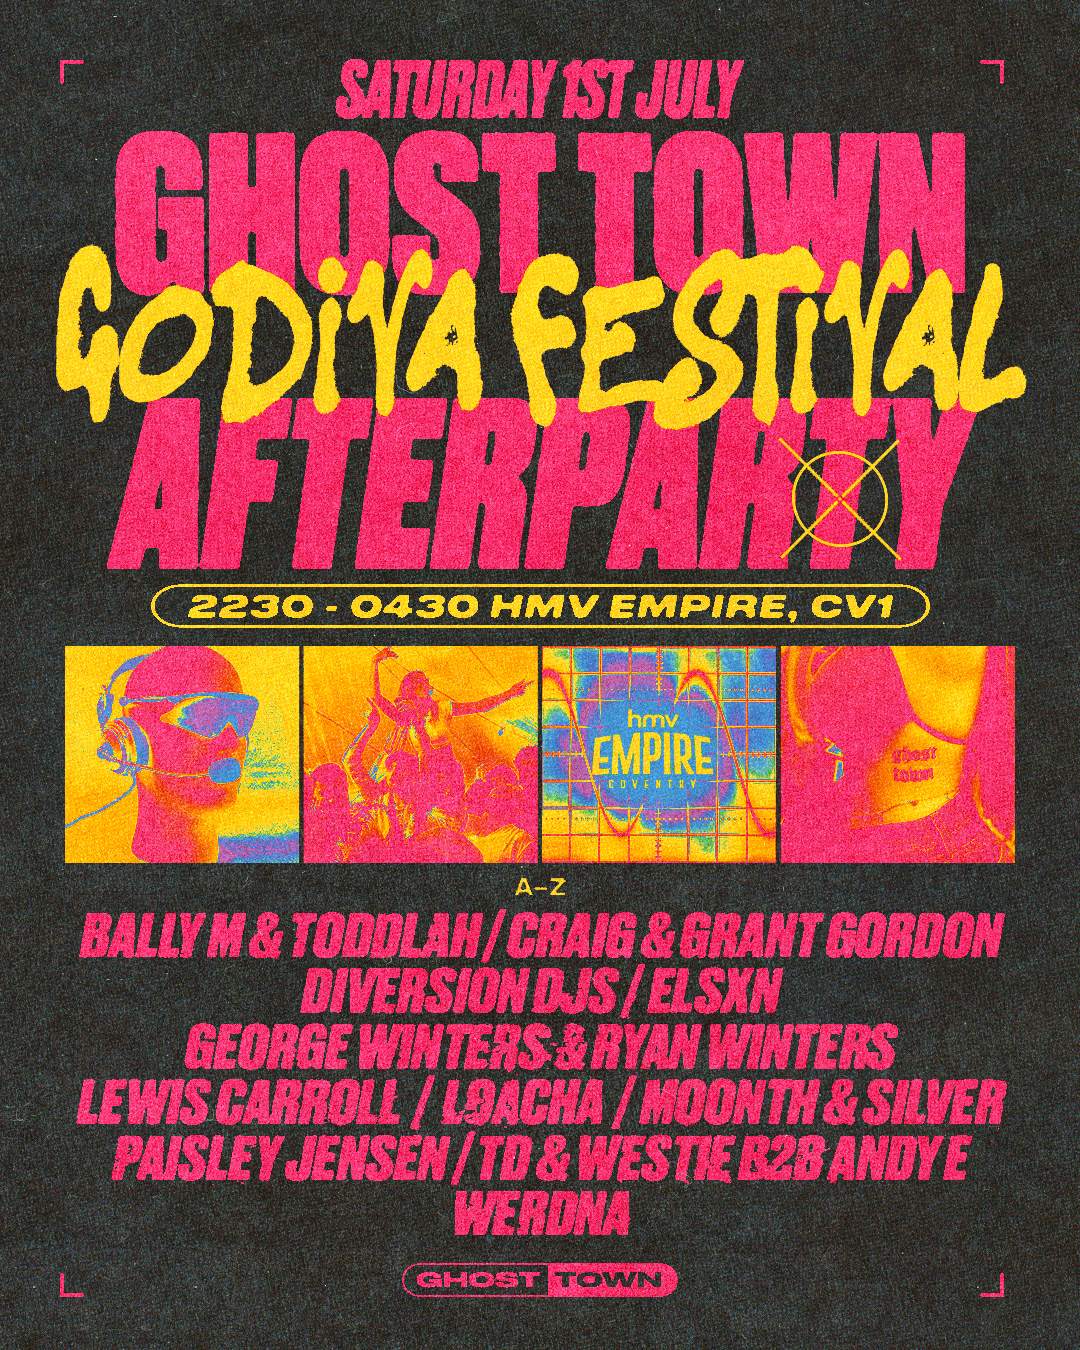 Ghost Town Godiva Festival Afterparty - フライヤー表